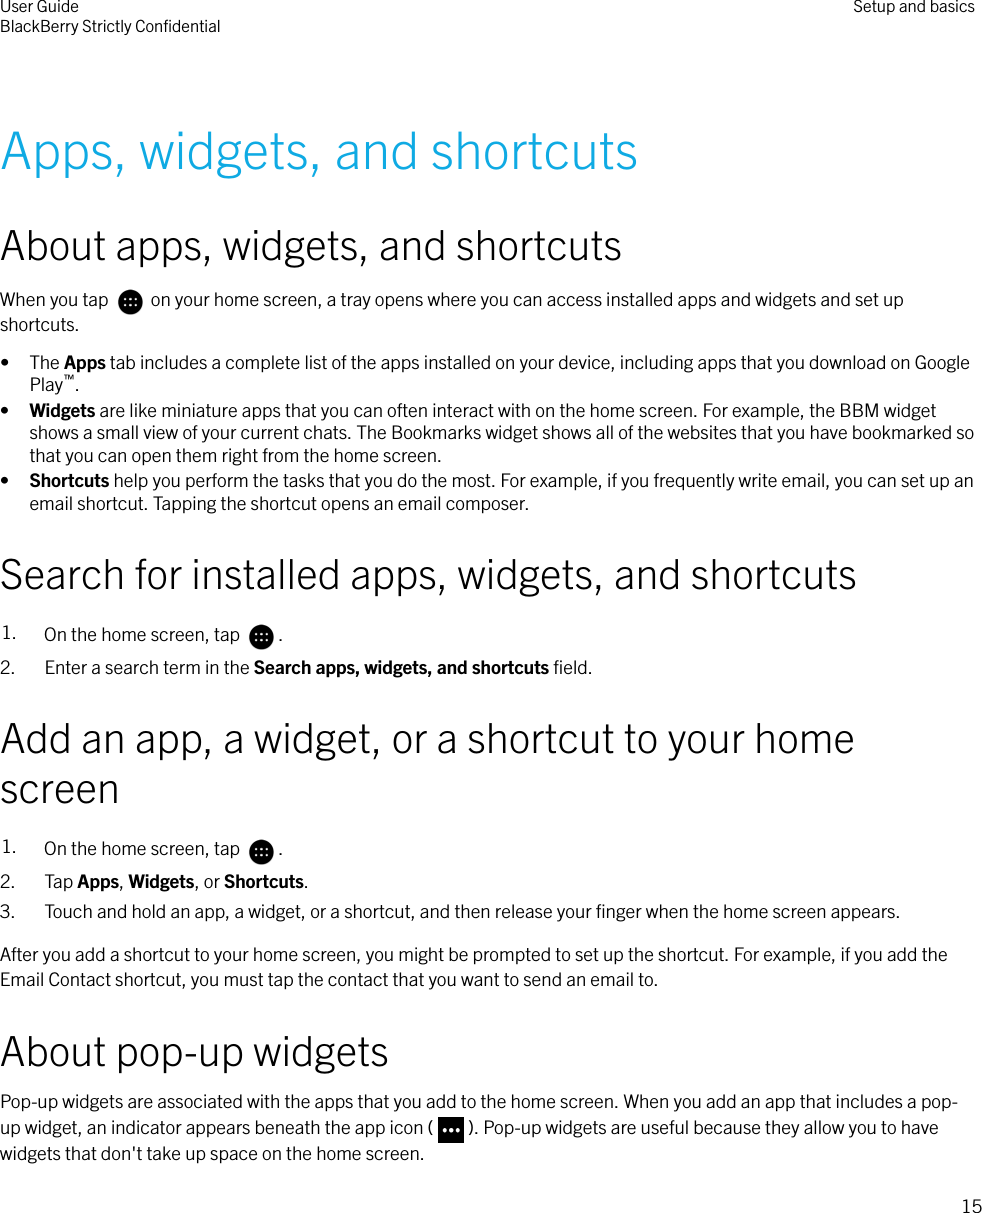  Apps, widgets, and shortcutsAbout apps, widgets, and shortcutsWhen you tap   on your home screen, a tray opens where you can access installed apps and widgets and set upshortcuts.• The Apps tab includes a complete list of the apps installed on your device, including apps that you download on GooglePlay™.•Widgets are like miniature apps that you can often interact with on the home screen. For example, the BBM widgetshows a small view of your current chats. The Bookmarks widget shows all of the websites that you have bookmarked sothat you can open them right from the home screen.•Shortcuts help you perform the tasks that you do the most. For example, if you frequently write email, you can set up anemail shortcut. Tapping the shortcut opens an email composer.Search for installed apps, widgets, and shortcuts1. On the home screen, tap  .2. Enter a search term in the Search apps, widgets, and shortcuts ﬁeld.Add an app, a widget, or a shortcut to your homescreen1. On the home screen, tap  .2. Tap Apps, Widgets, or Shortcuts.3. Touch and hold an app, a widget, or a shortcut, and then release your ﬁnger when the home screen appears.After you add a shortcut to your home screen, you might be prompted to set up the shortcut. For example, if you add theEmail Contact shortcut, you must tap the contact that you want to send an email to.About pop-up widgetsPop-up widgets are associated with the apps that you add to the home screen. When you add an app that includes a pop-up widget, an indicator appears beneath the app icon ( ). Pop-up widgets are useful because they allow you to havewidgets that don&apos;t take up space on the home screen.User GuideBlackBerry Strictly ConﬁdentialSetup and basics15